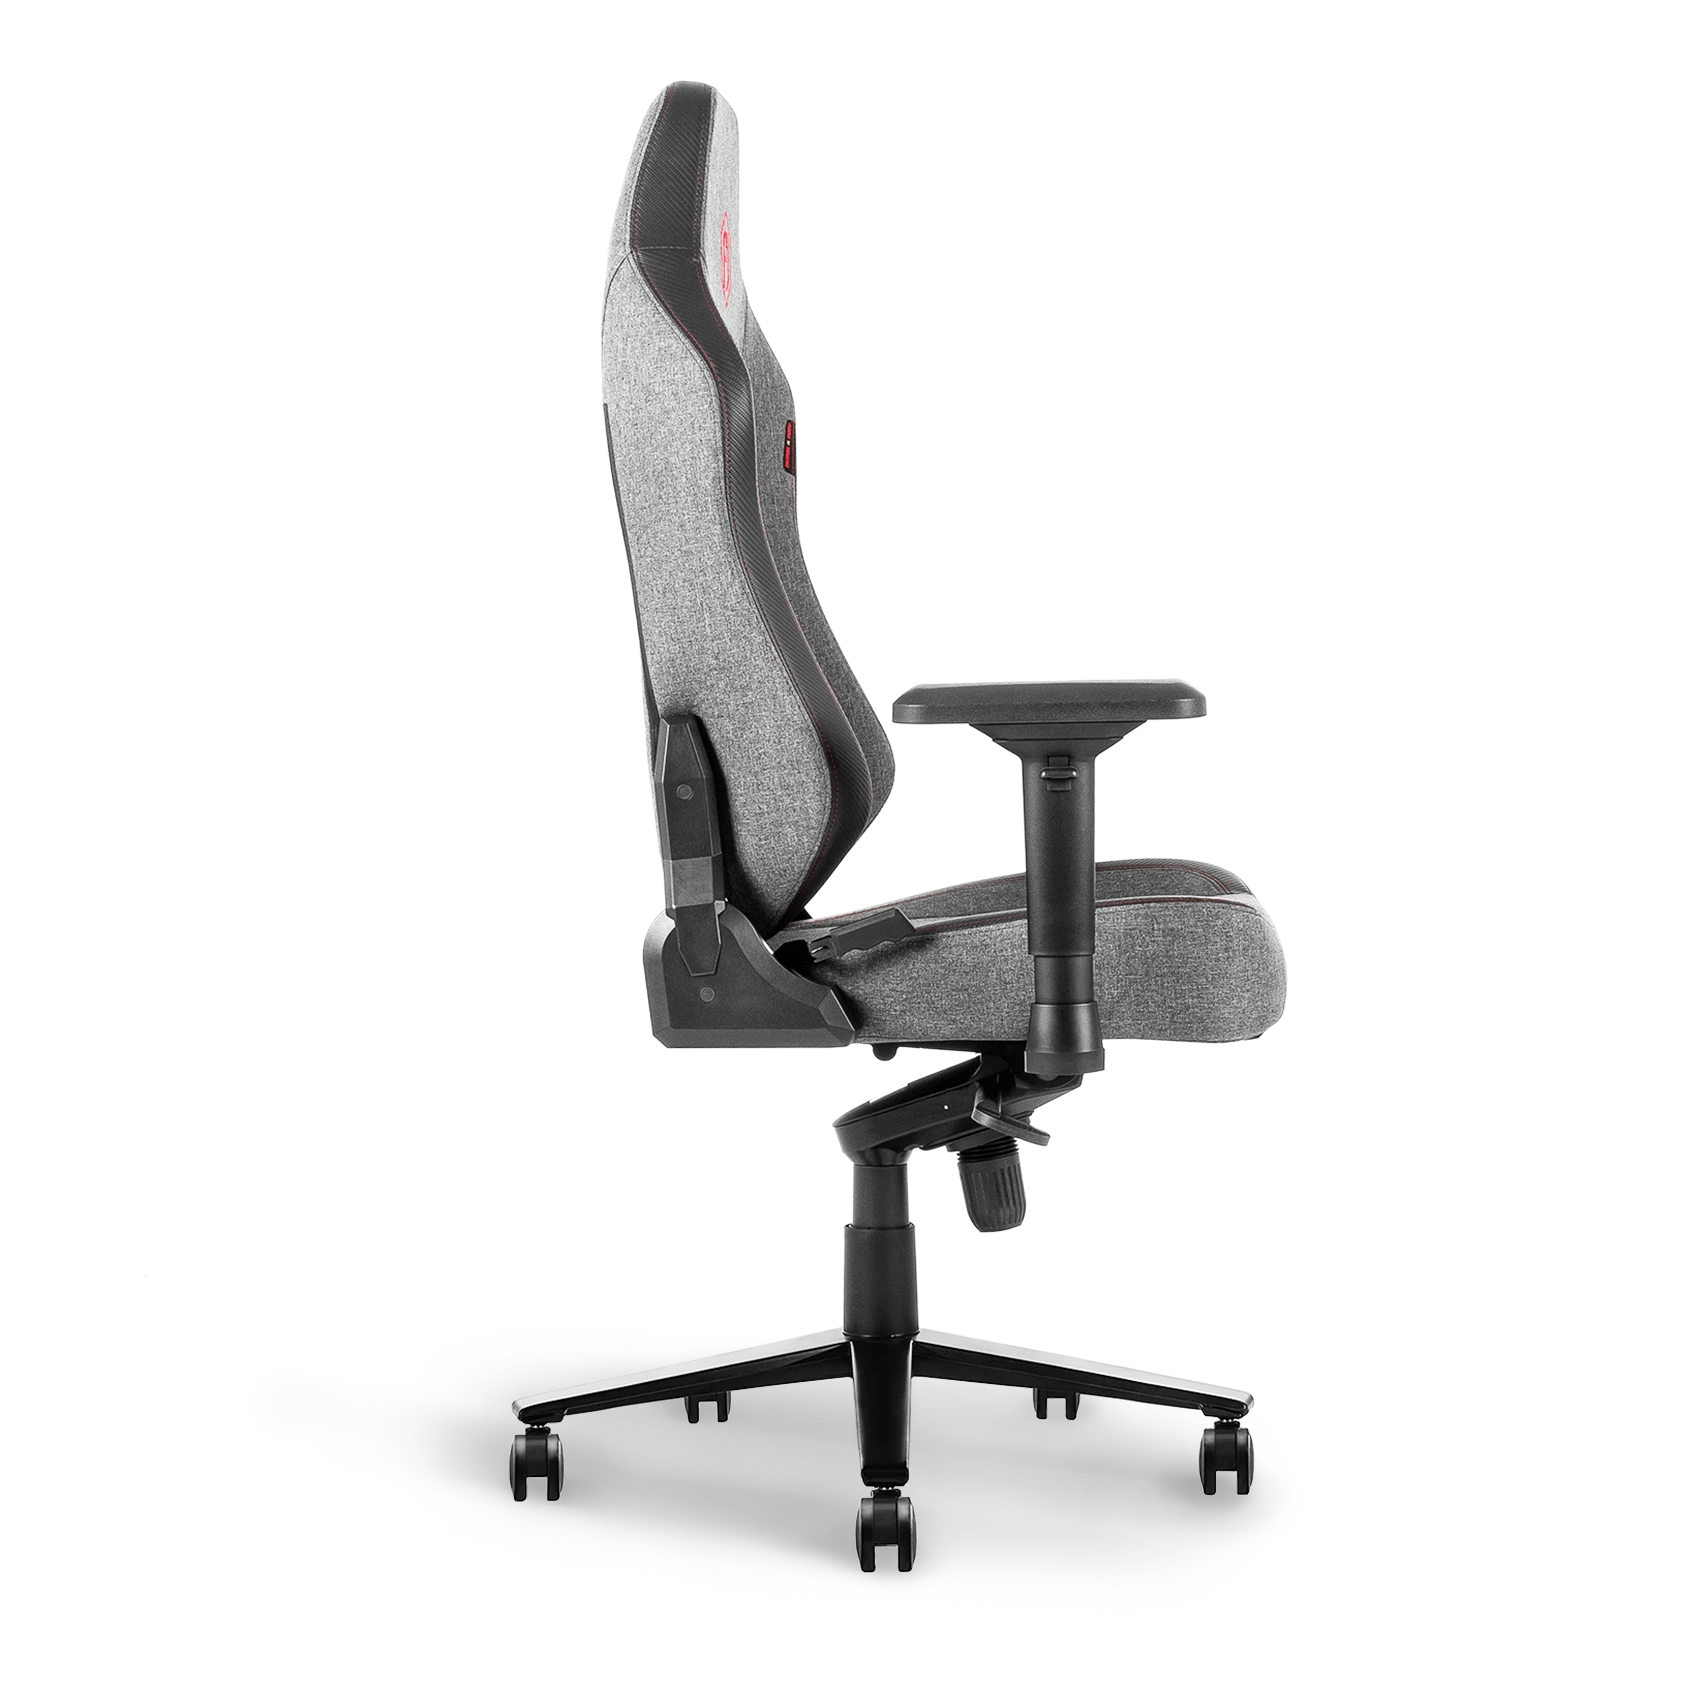 Side profile of Heather grey ergonomic gaming chair with stylish design and supportive structure.